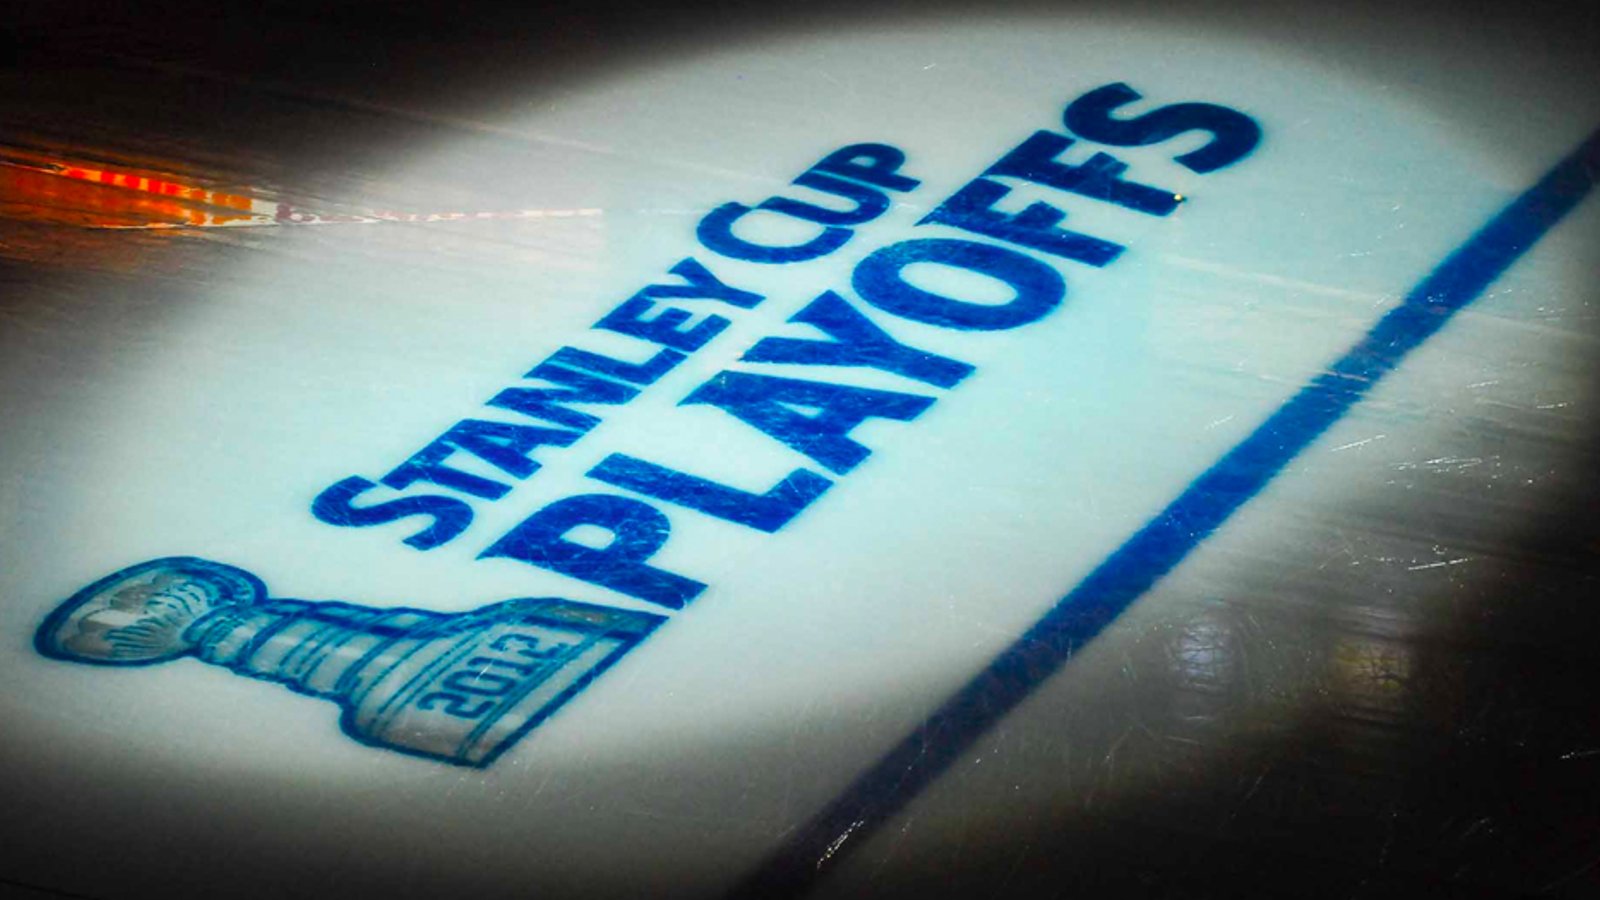 Complete list of cities being considered by NHL for hosting Stanley Cup Playoffs